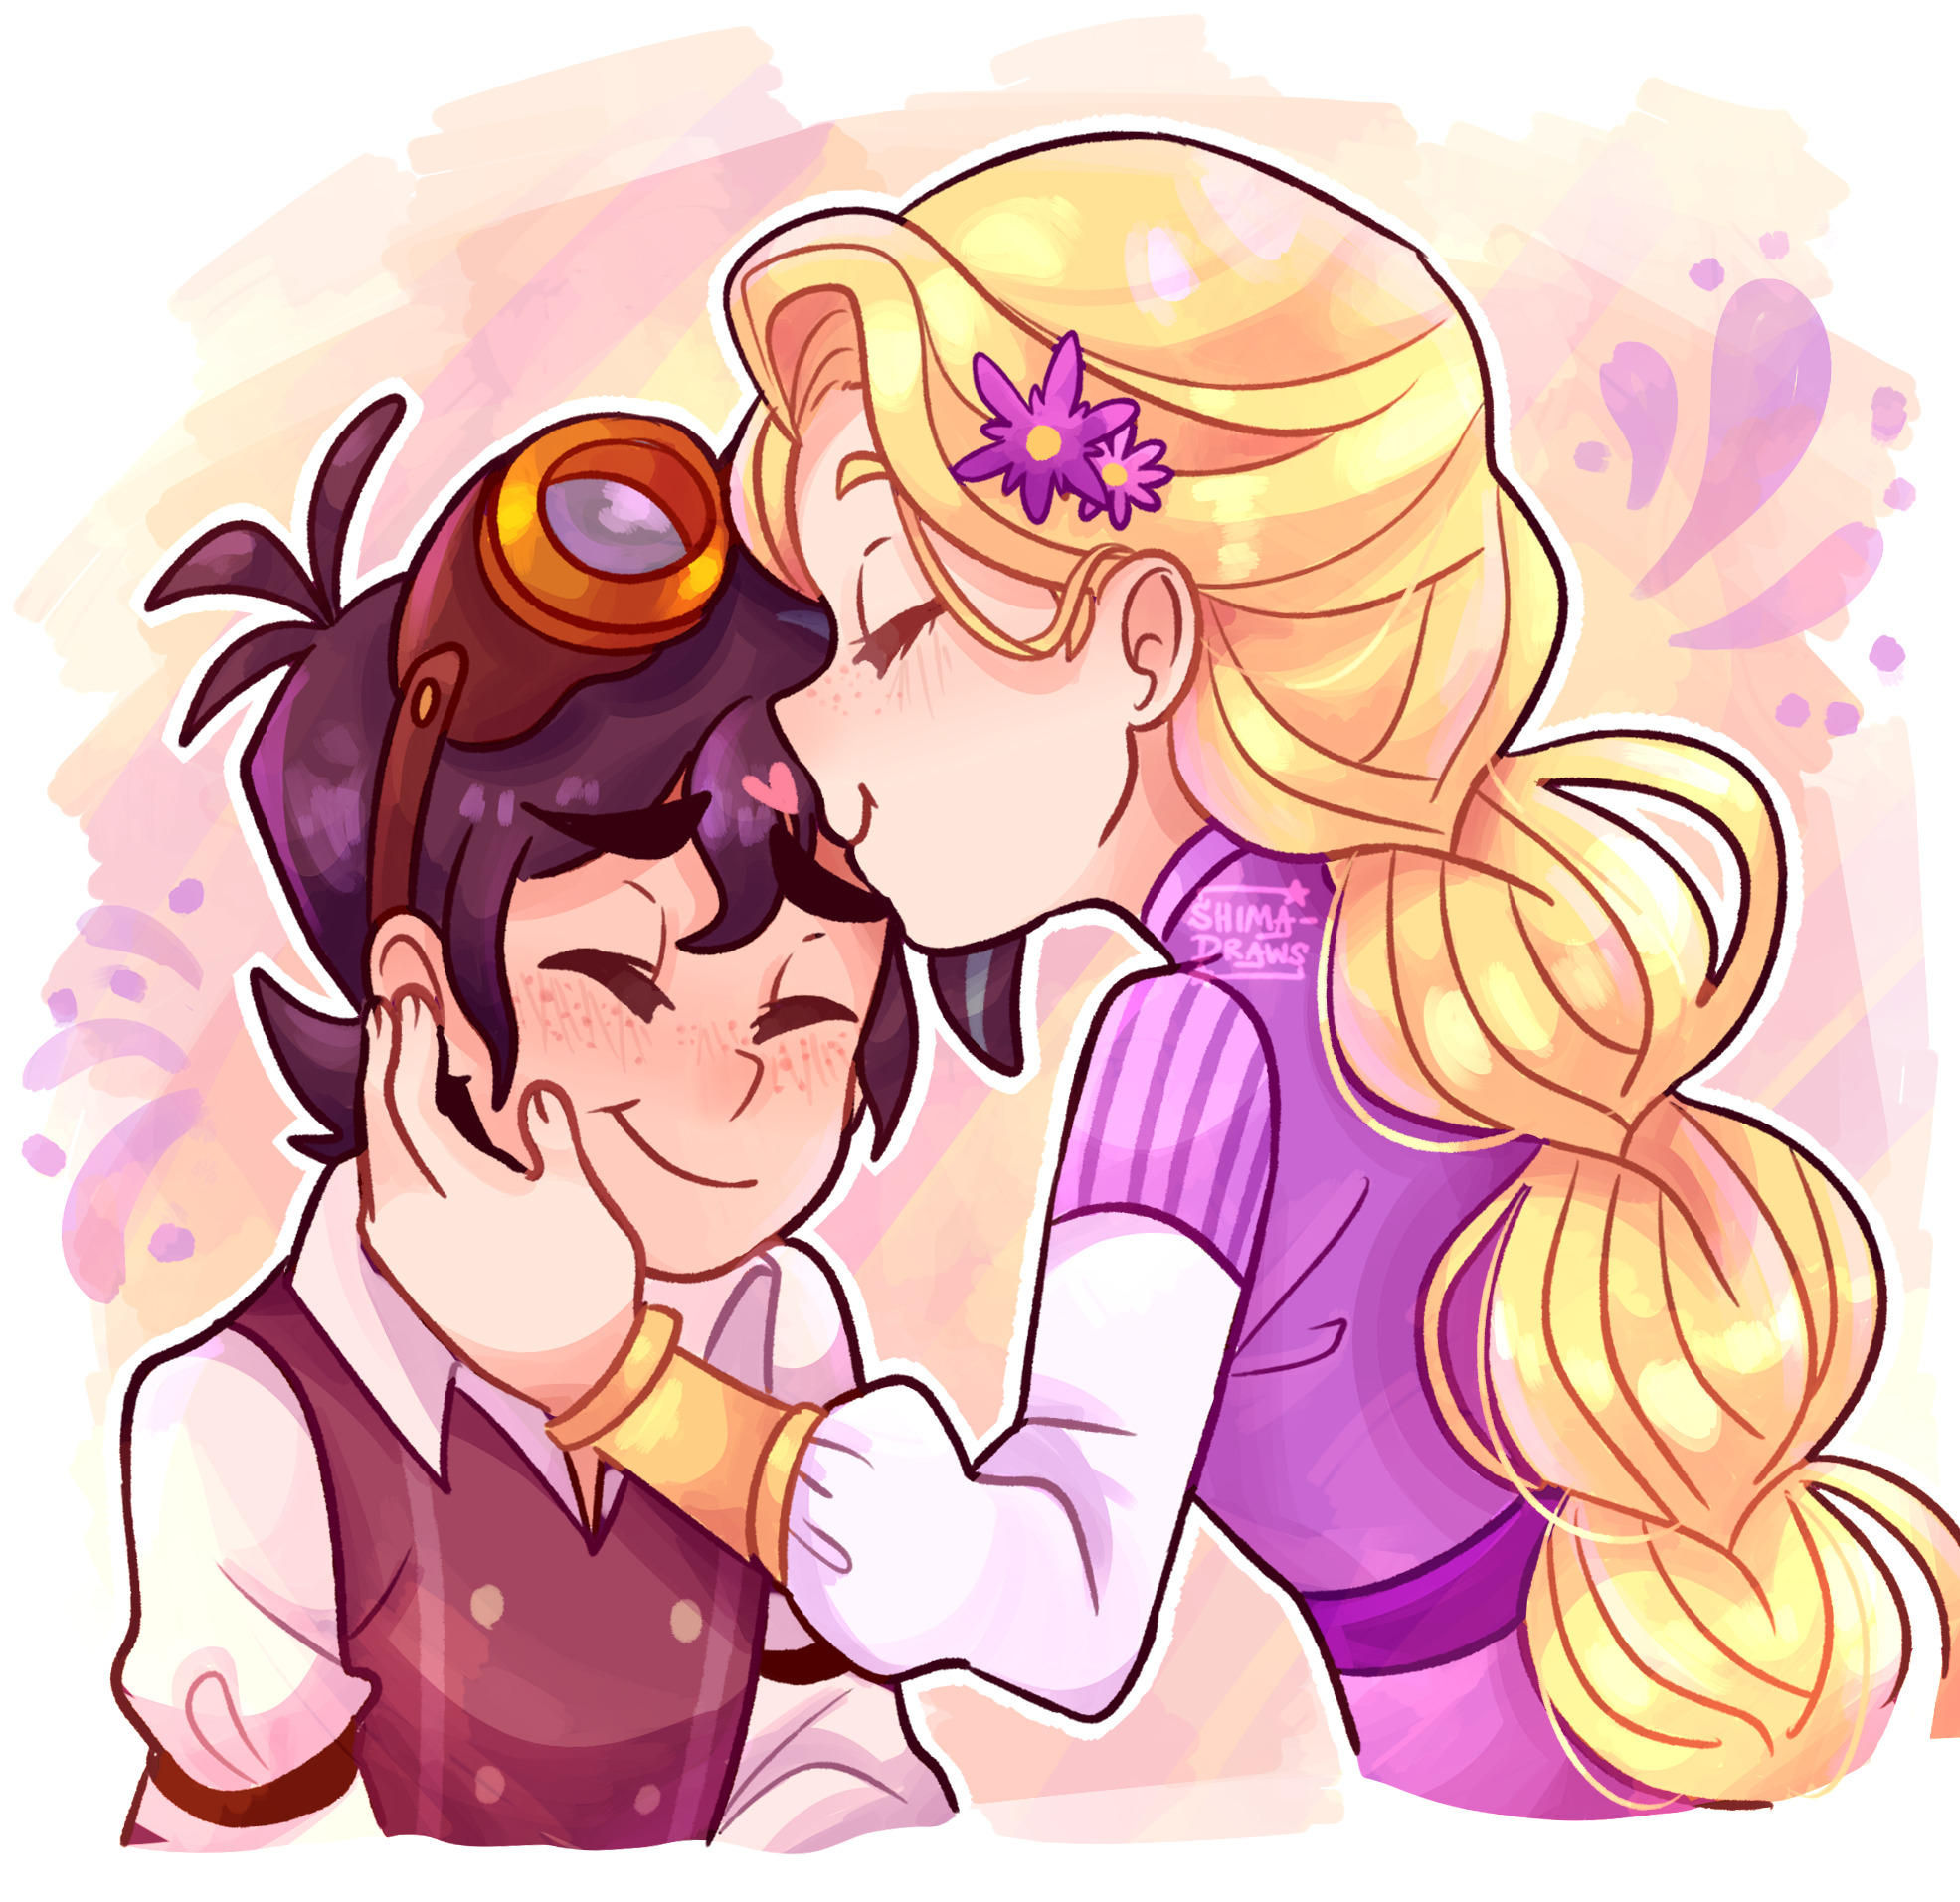 Tangled: The Series Art by shima-draws